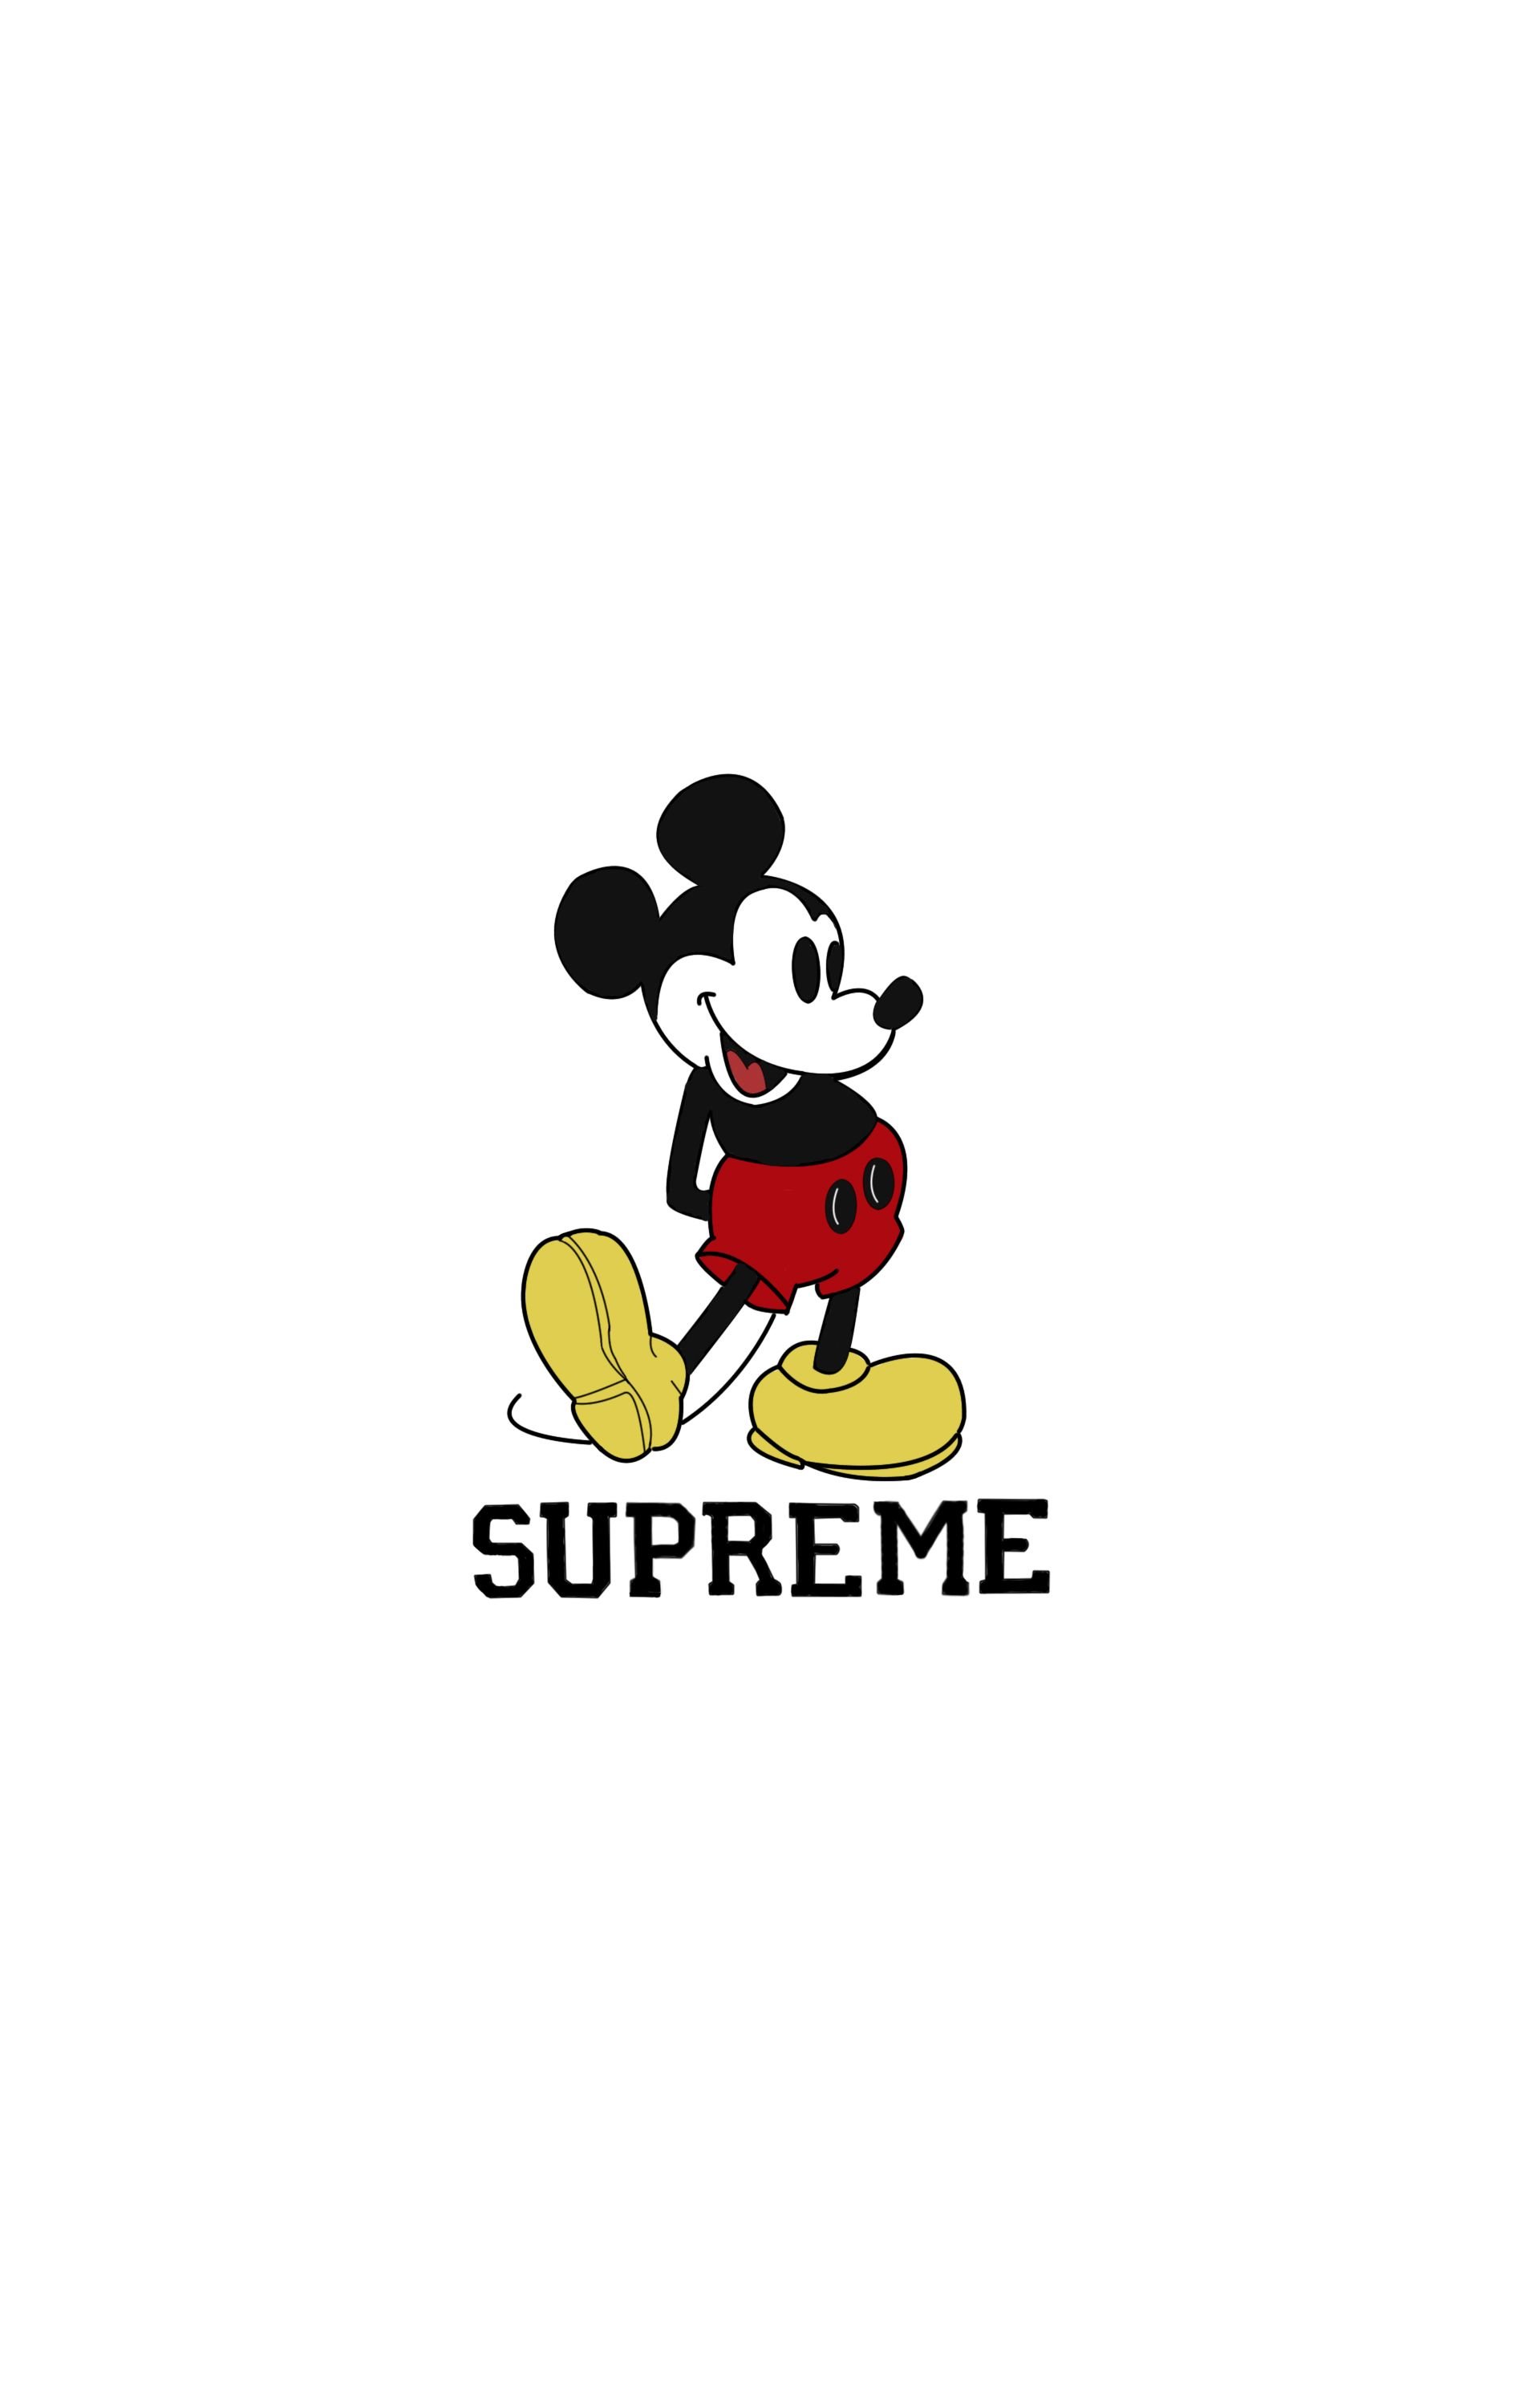 Mickey Mouse Iphone 5 Wallpapers